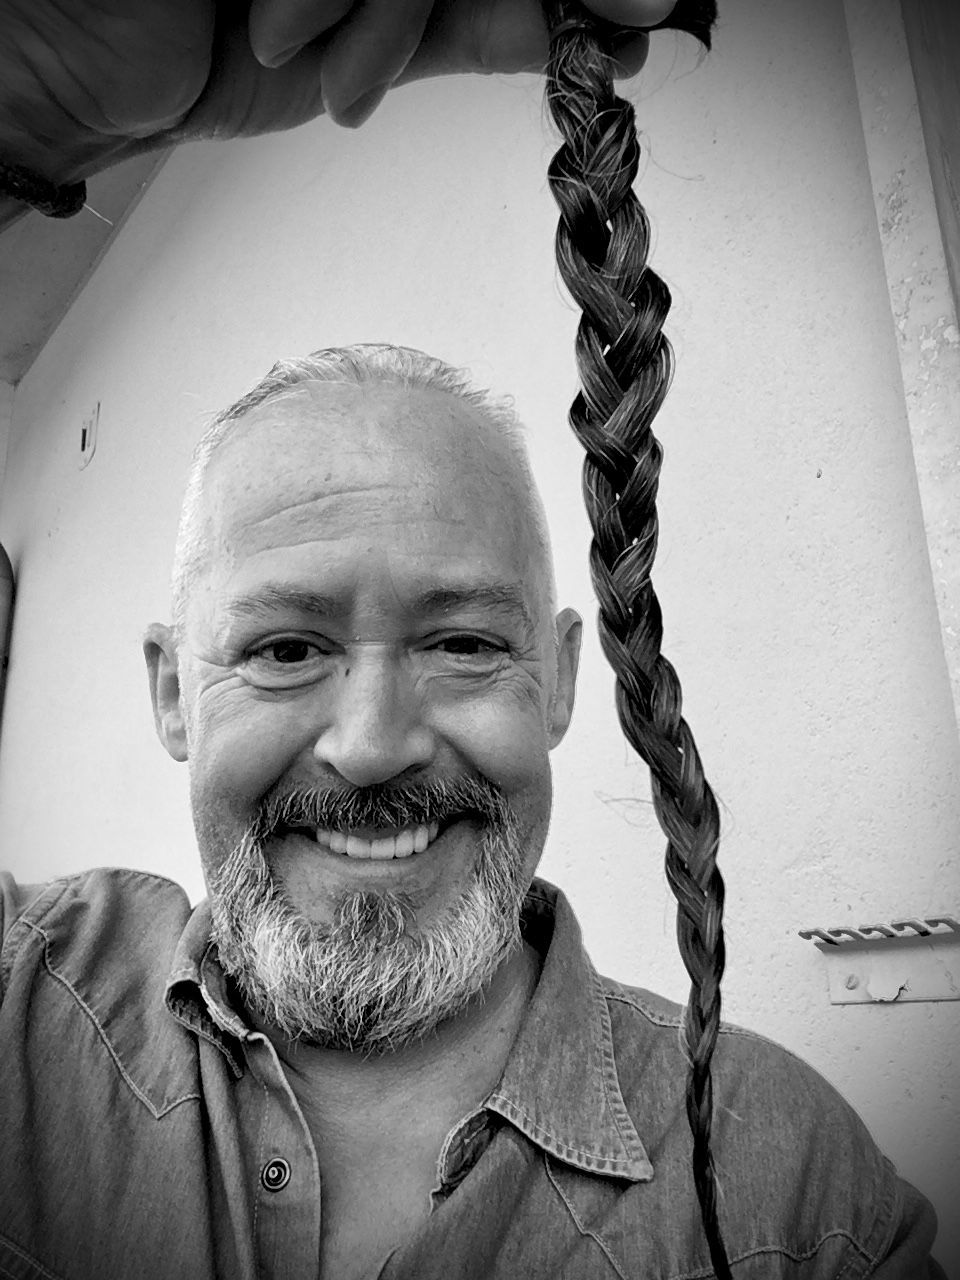 black and white, portrait, one person, adult, black, monochrome photography, monochrome, men, chain, headshot, moustache, senior adult, smiling, white, facial hair, front view, emotion, person, looking at camera, beard, happiness, close-up, mature adult, lifestyles, jewelry